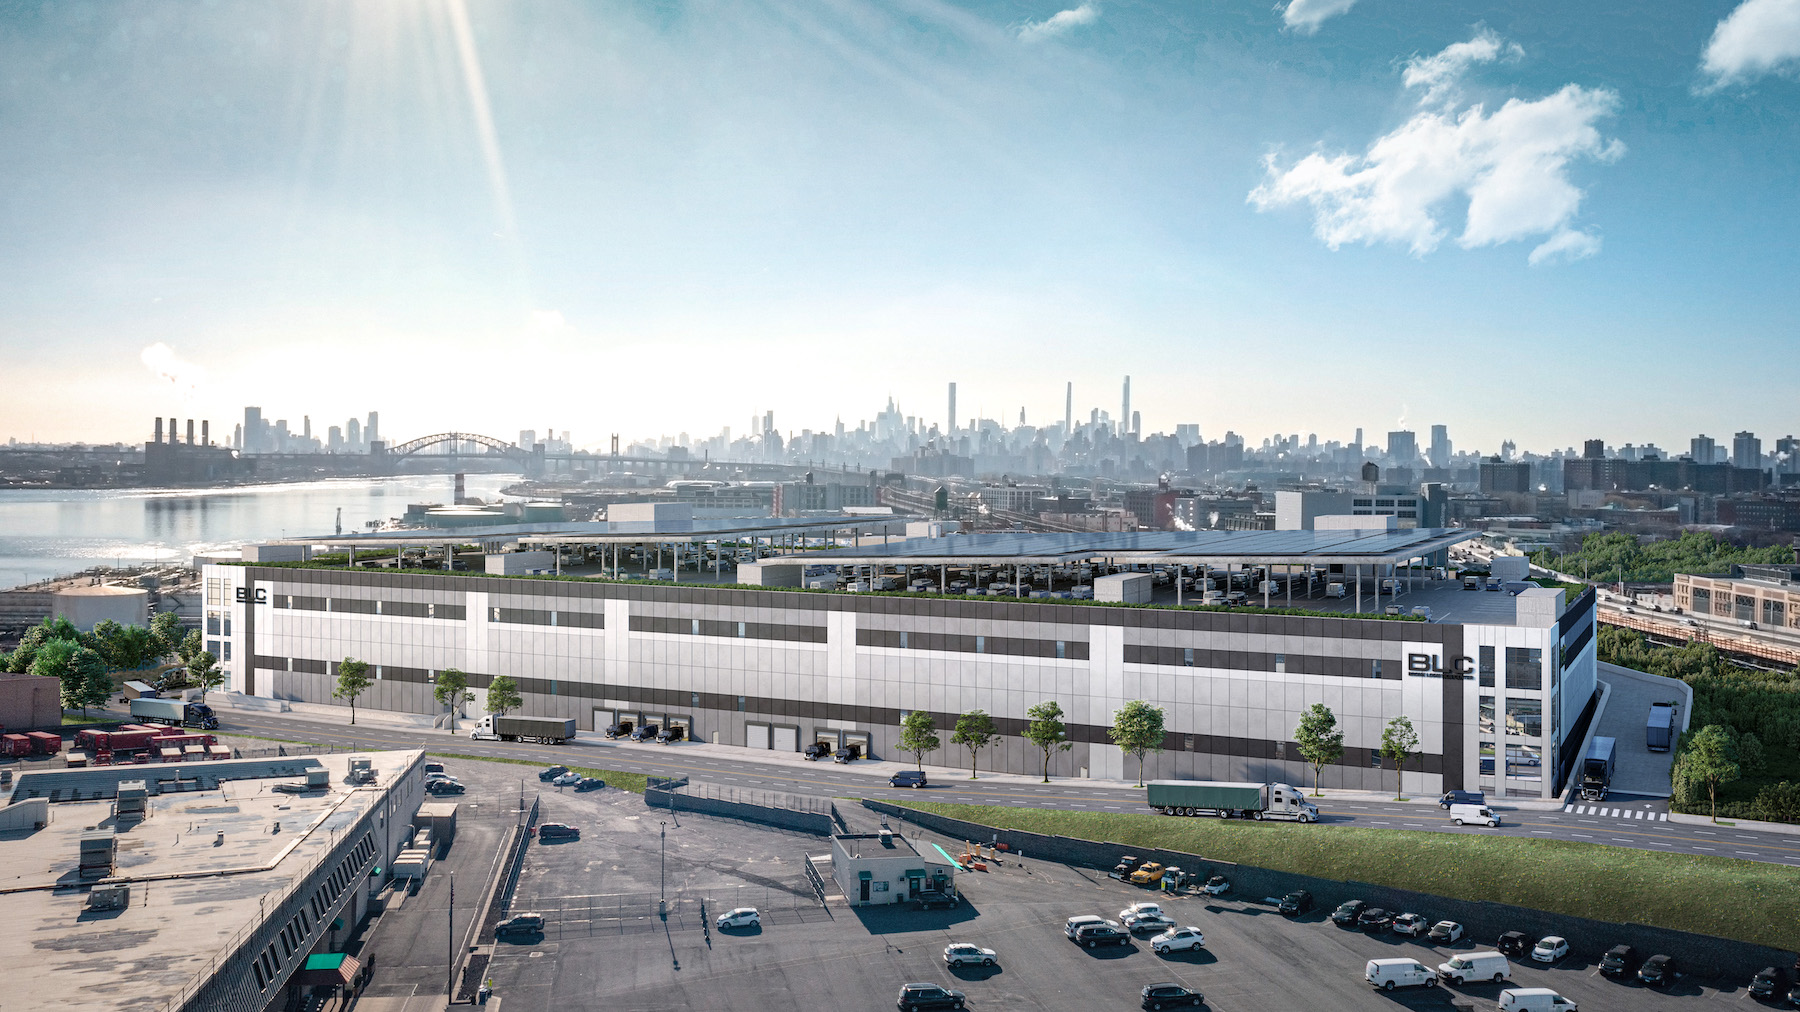 A rendering of the 1.3-million-sf Logistics Center in The Bronx, N.Y.